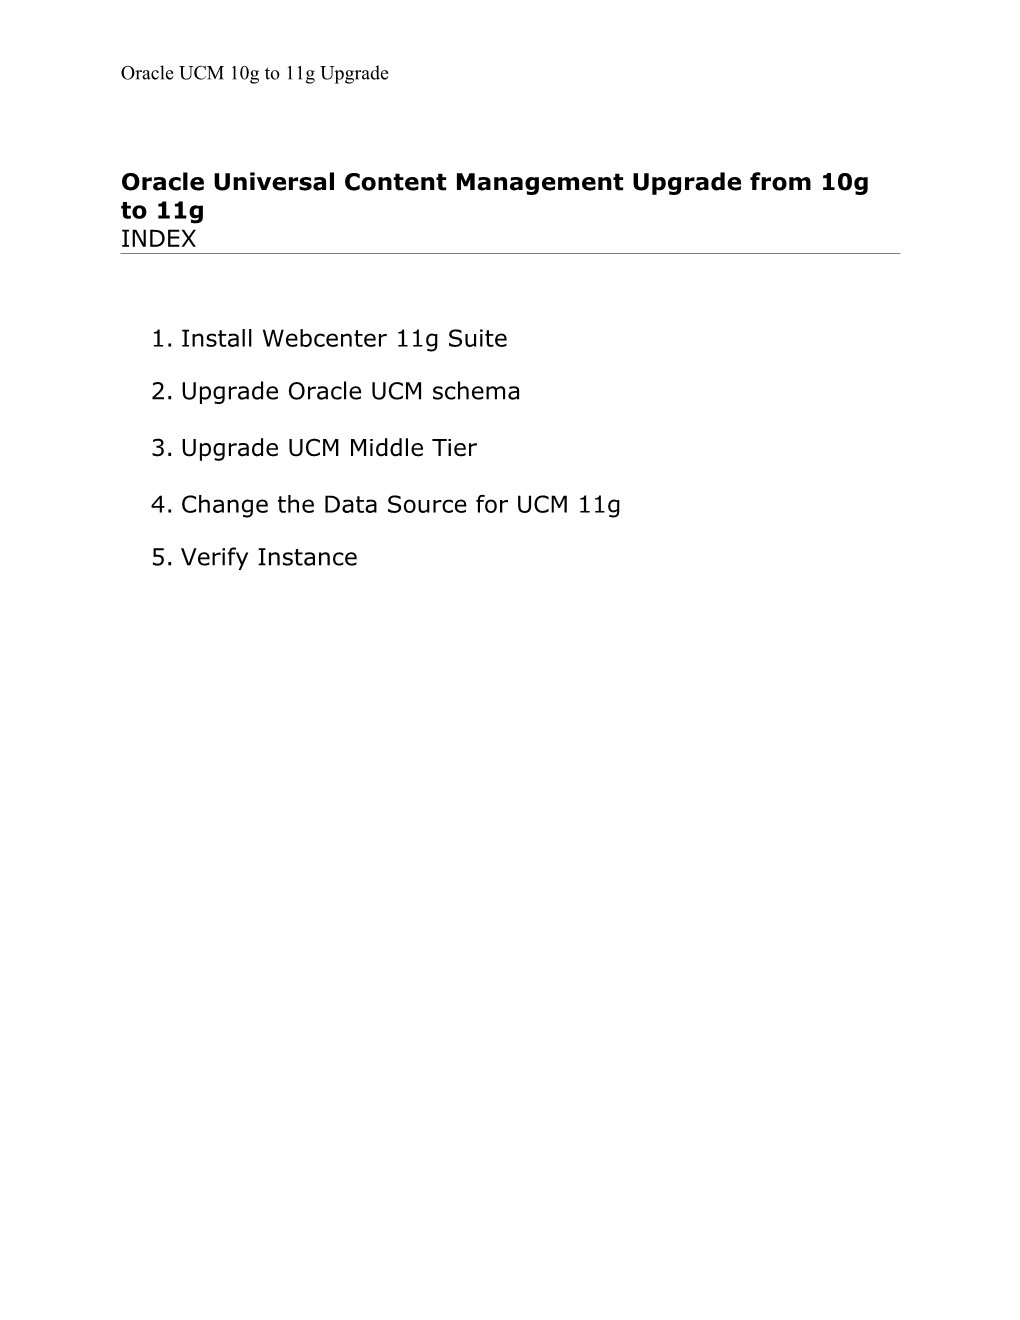 Oracle Universal Content Management Upgrade from 10G to 11G